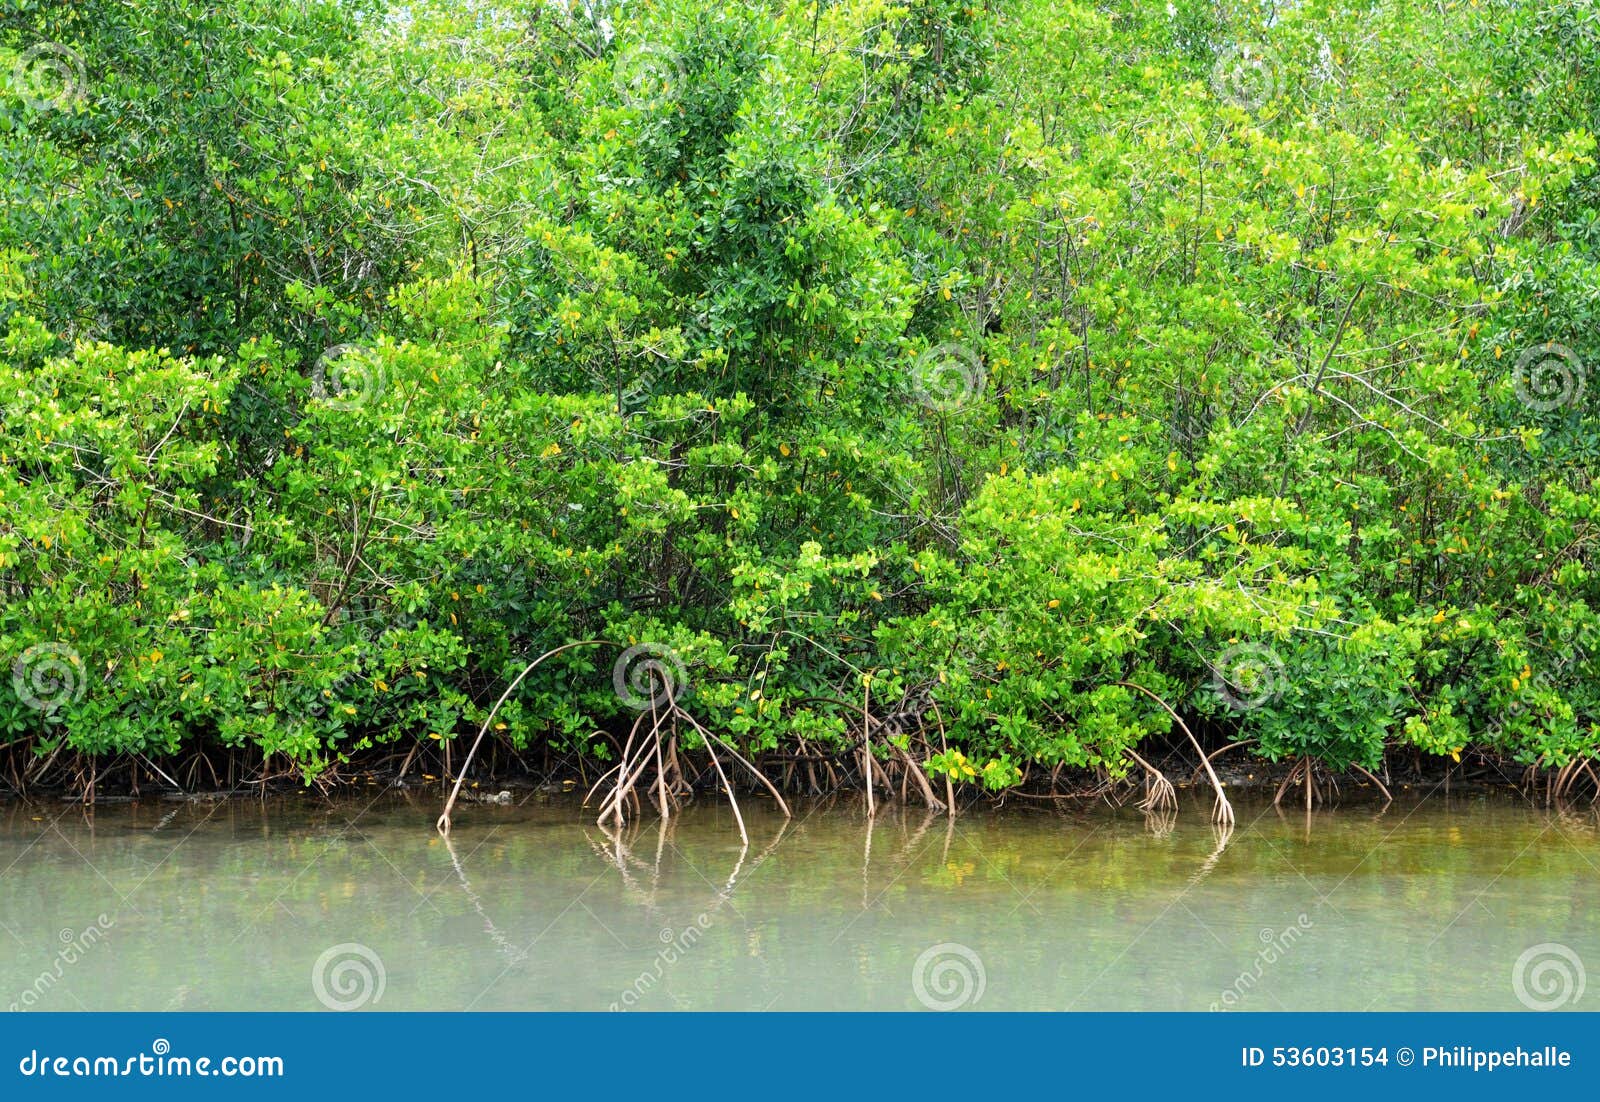 mangrove swamp in petit canal in guadeloupe